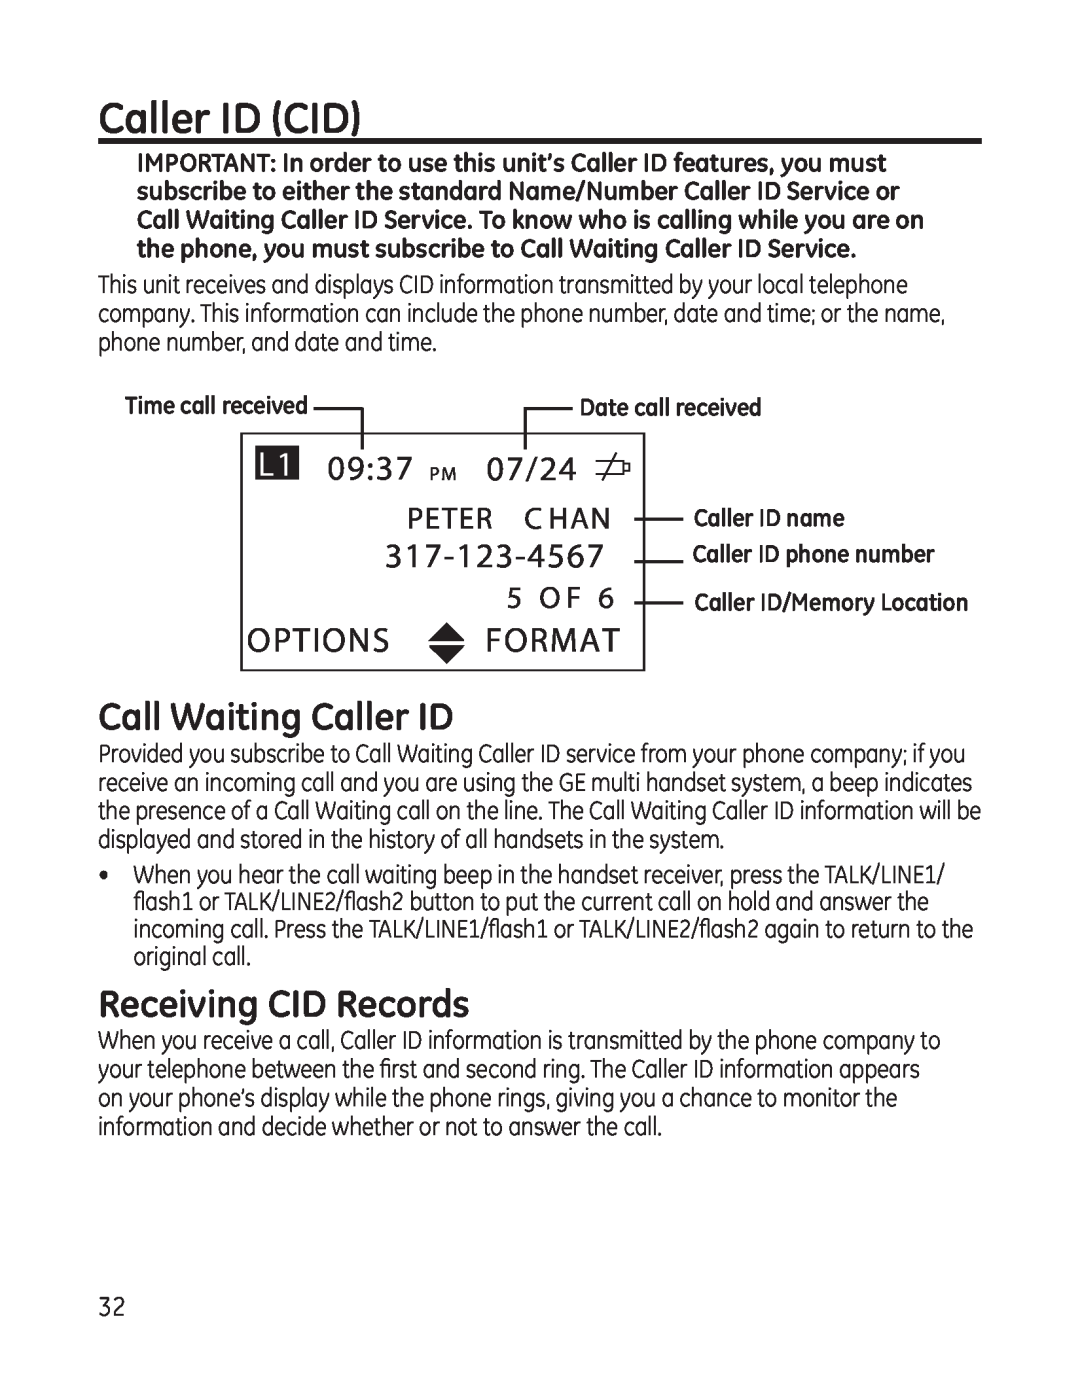 GE 25865 Caller ID CID, Call Waiting Caller ID, Receiving CID Records, Peter C Han, 5 O F, 0937 PM, 07/24, Options, Format 